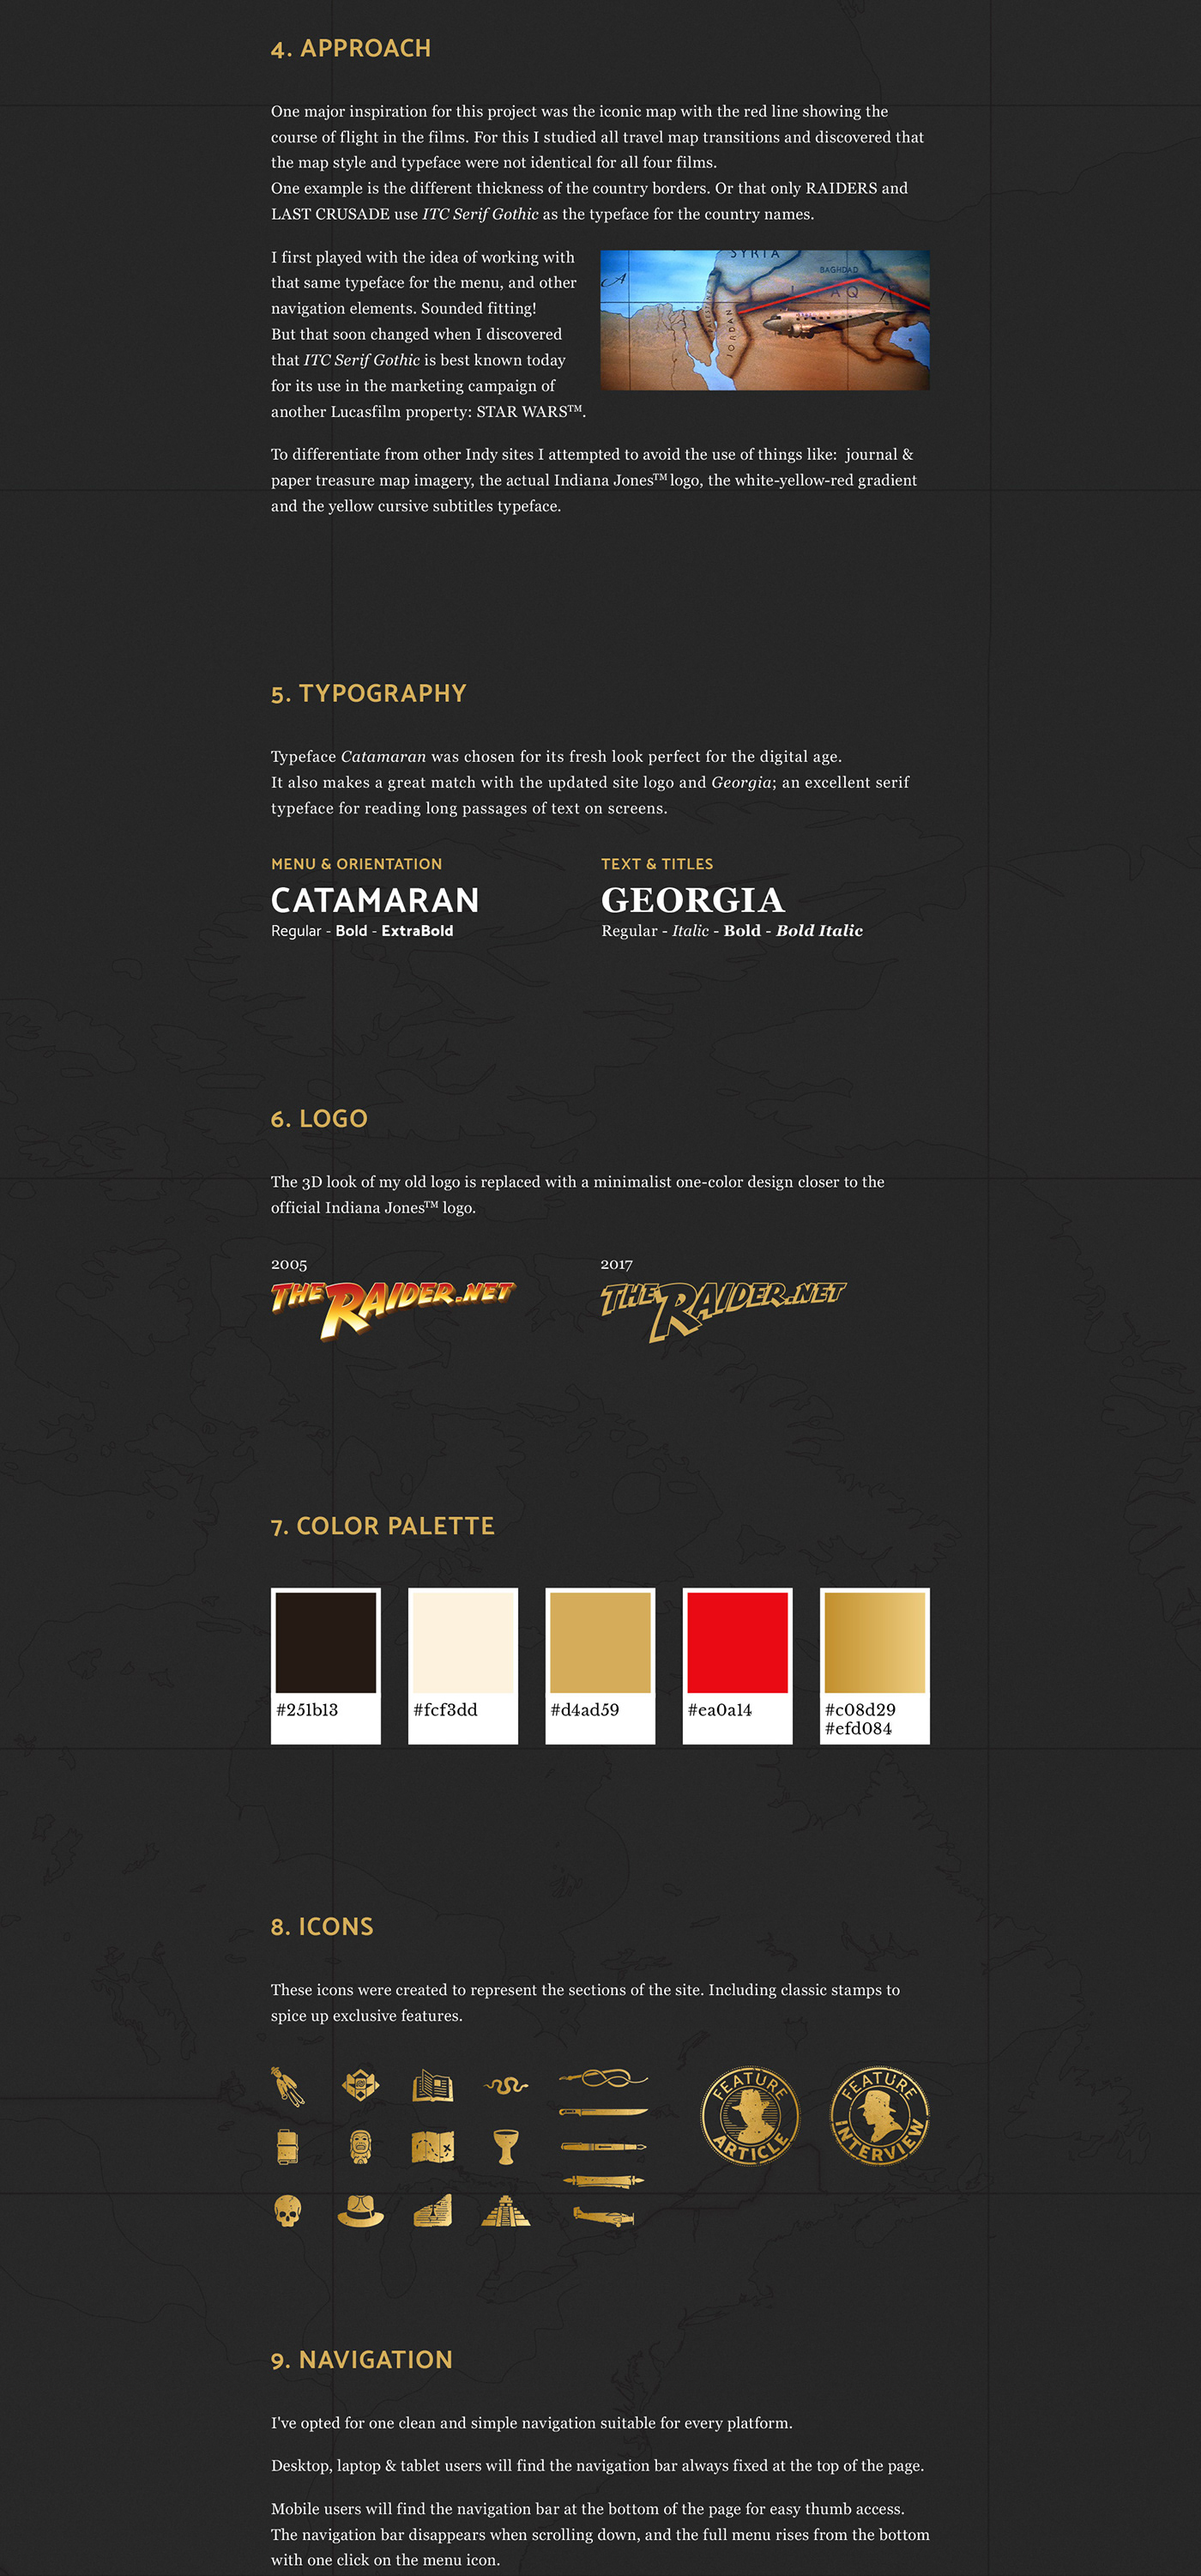 TheRaider.net redesign concept - Approach, typography, logo design, icons, colour palette